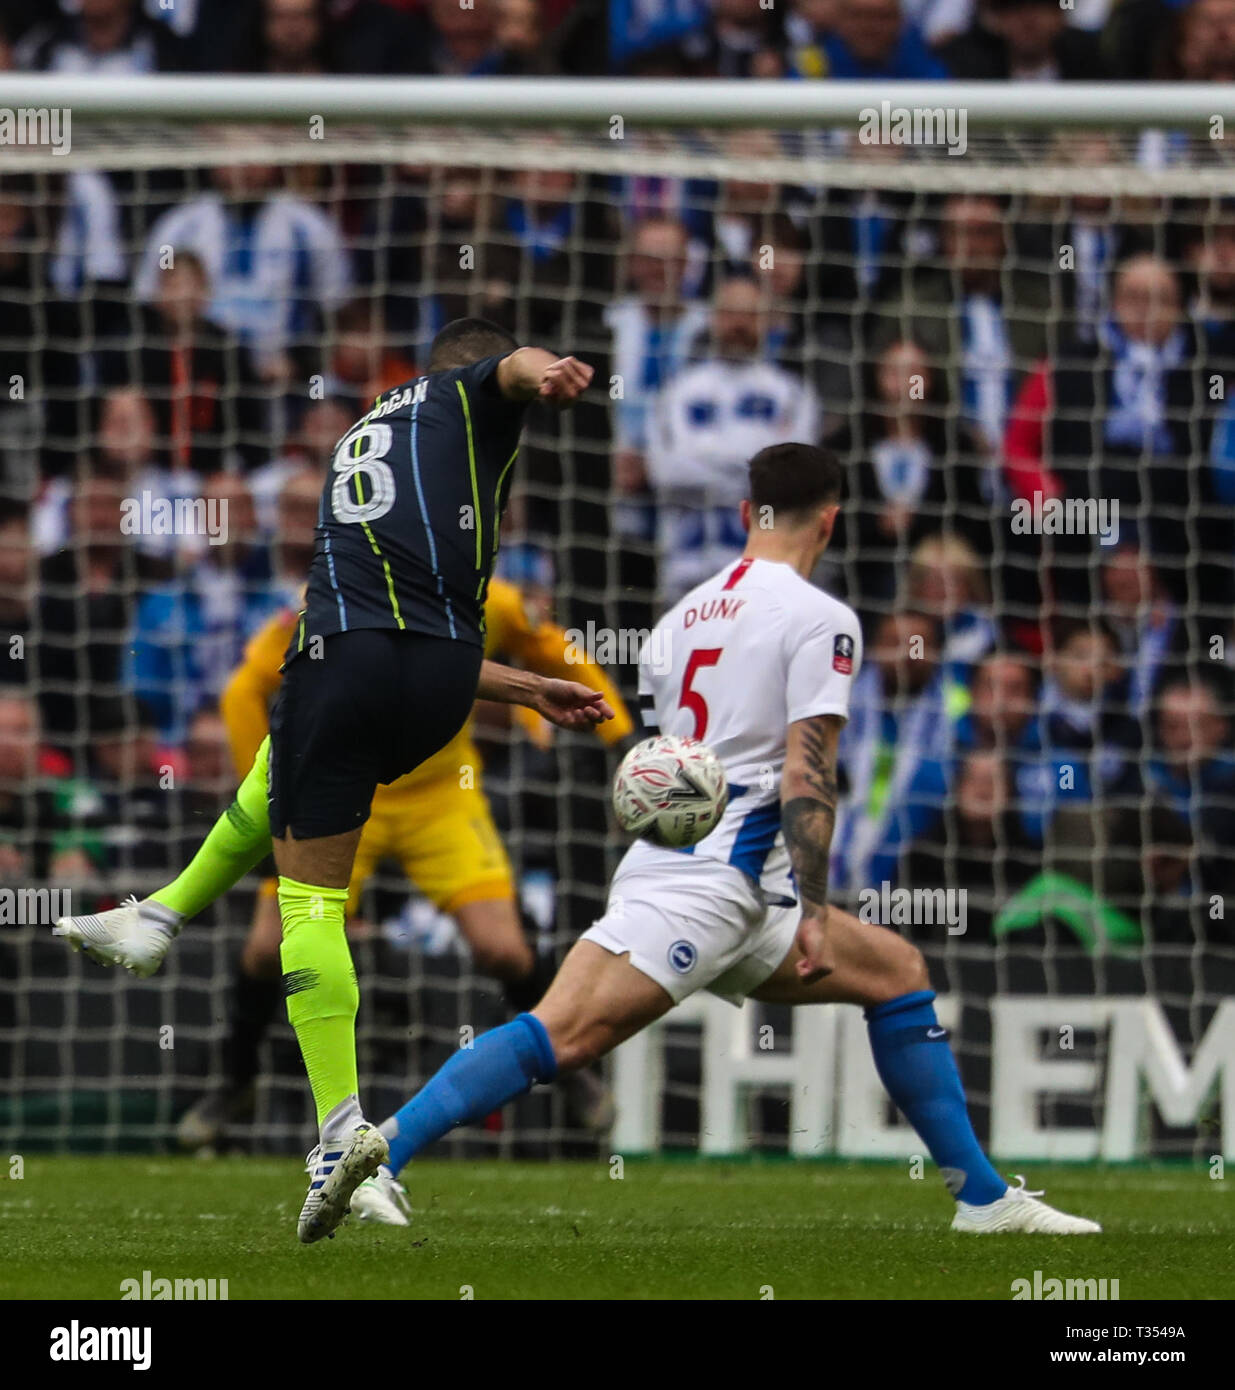 Wembley, London, UK. 06th Apr, 2019. Ilkay Gundogan of Manchester City sees his goalbound strike blocked by Lewis Dunk of Brighton & Hove Albion during the Emirates FA Cup Semi Final match between Manchester City and Brighton & Hove Albion at Wembley Stadium on April 6th 2019 in London, England.  Credit: PHC Images/Alamy Live News Stock Photo